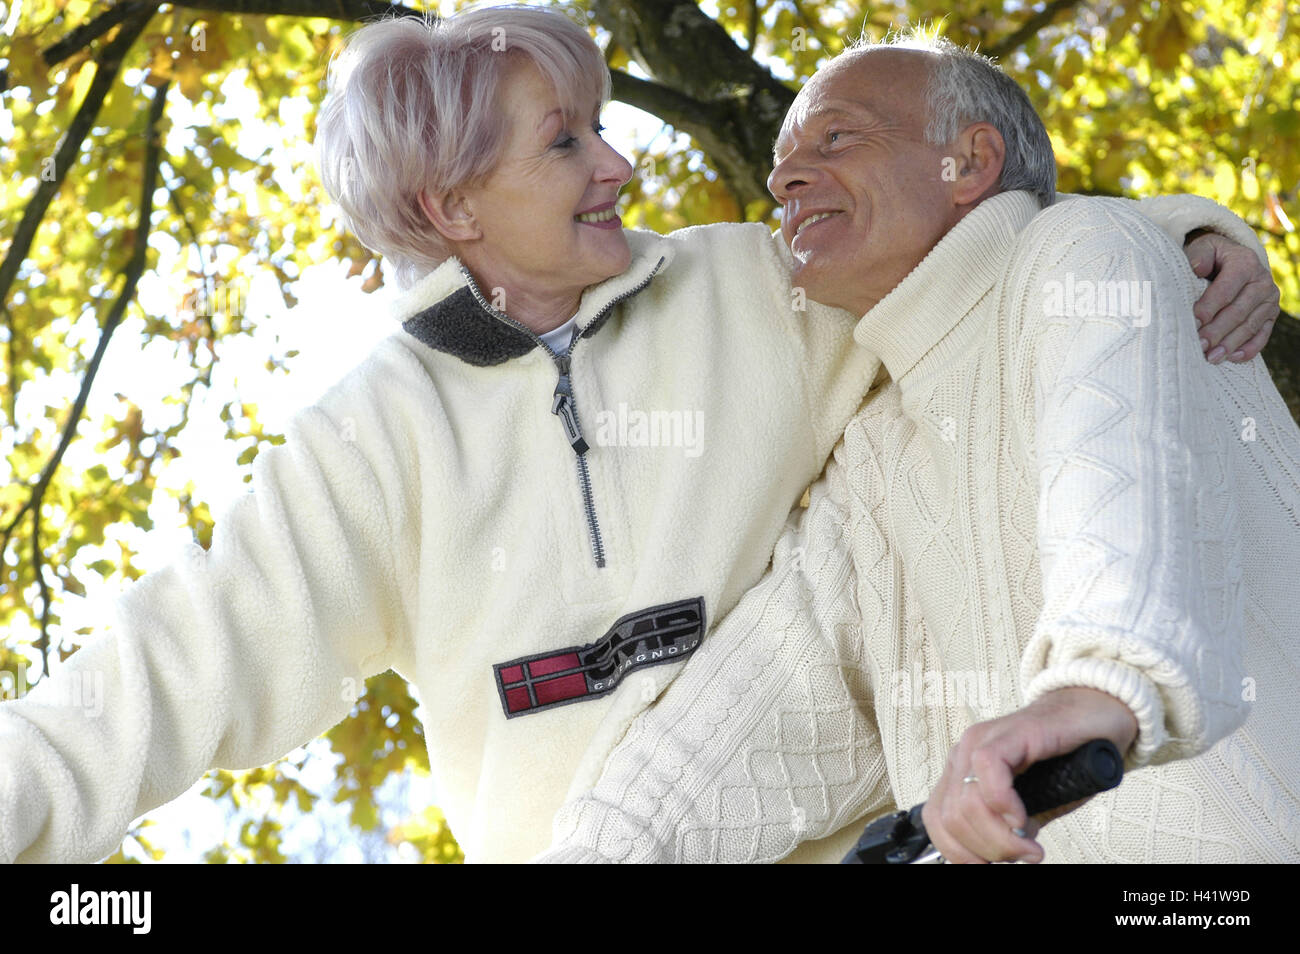 Park, Senior couple, mountain bikes, happy, eye contact, half portrait, autumn park, 55-65 years, Best Agers, couple, senior citizens, Jung-remaining, partnership, respect, pullover white, riding of a bike, cycling tour, excursion, bicycle tour, rest, joy, happy, embrace, amusements, cheerfulness, harmony, togetherness, fitness, health, activity, activity, lifestyle, leisure time equaliser, autumnally, 50-60 years, 60-70 years, 50-60 years, 60-70 years Stock Photo